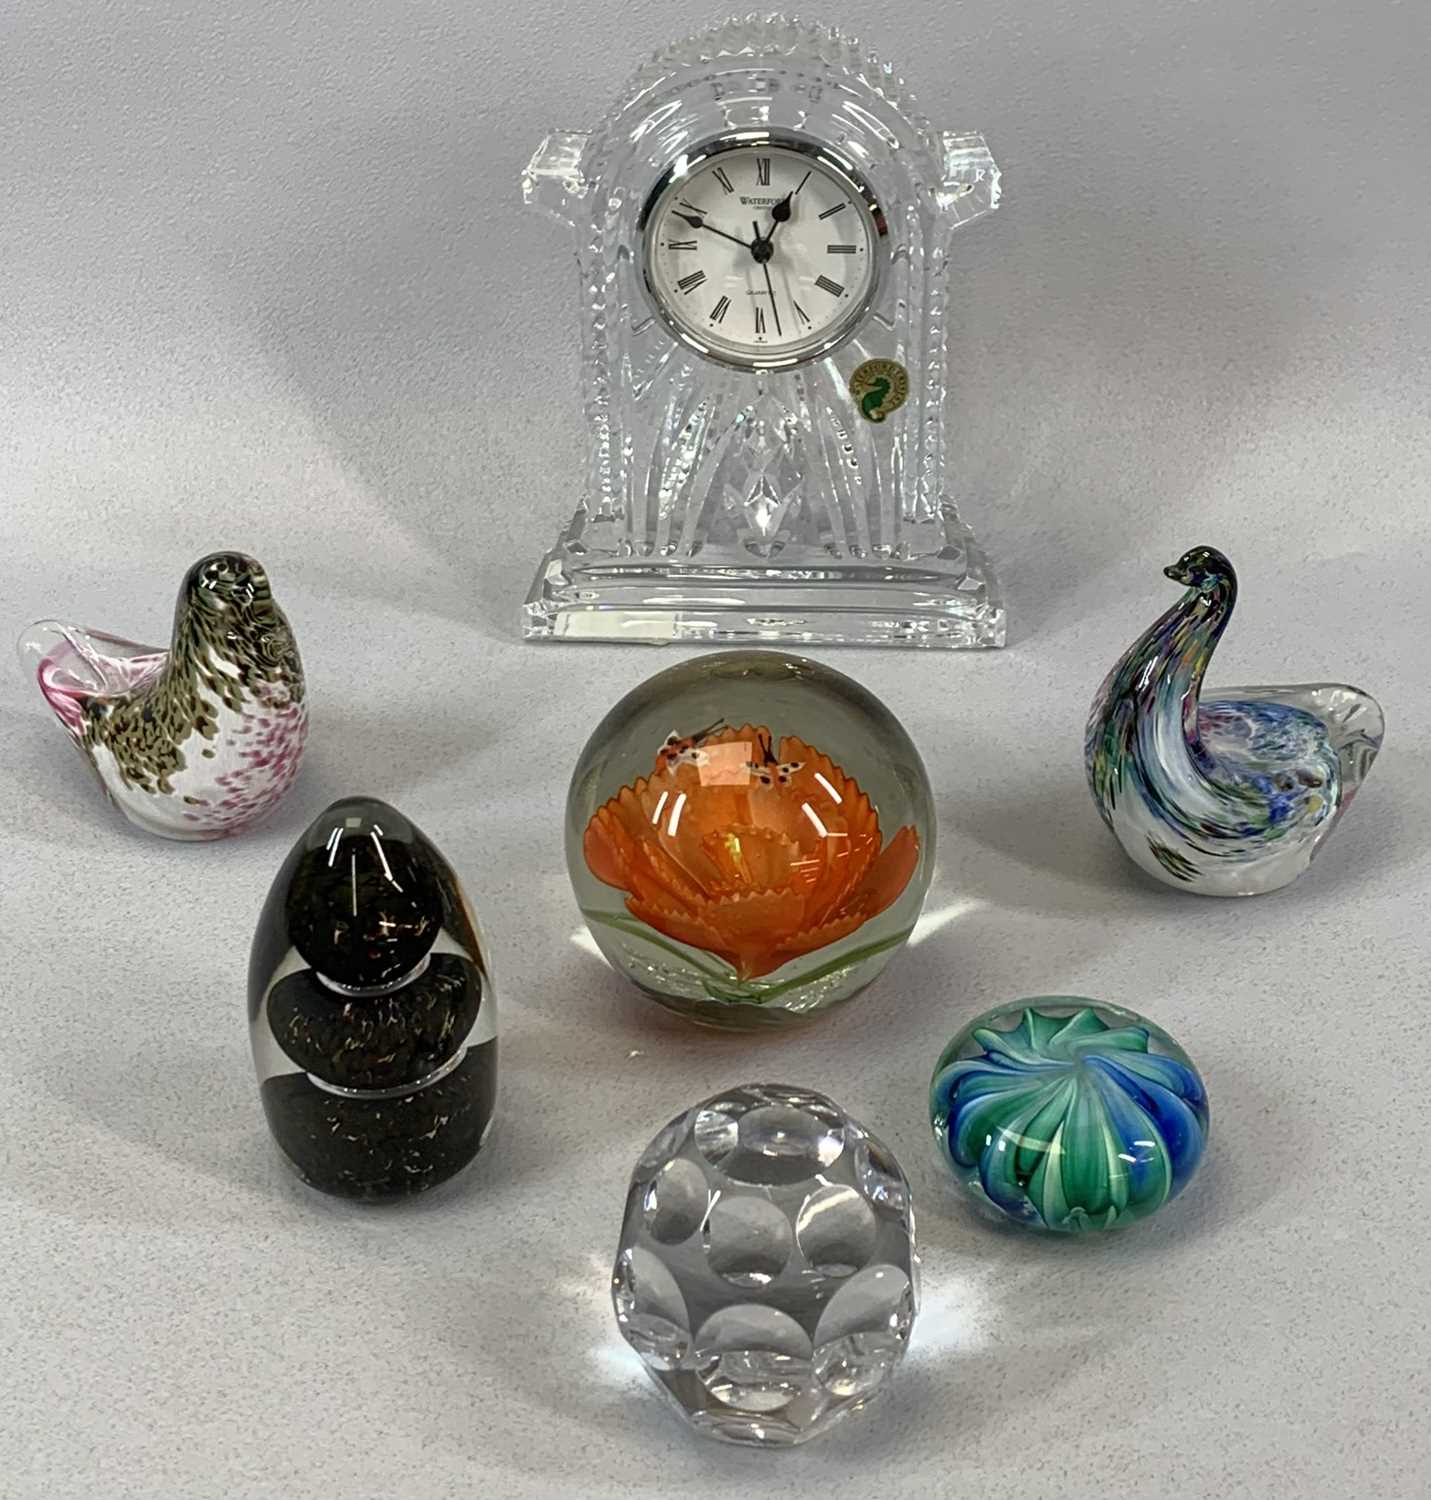 VAROUS ORNAMENTAL GLASSWARE including Waterford Crystal mantel clock, 18.5cms (h) and Studio glass